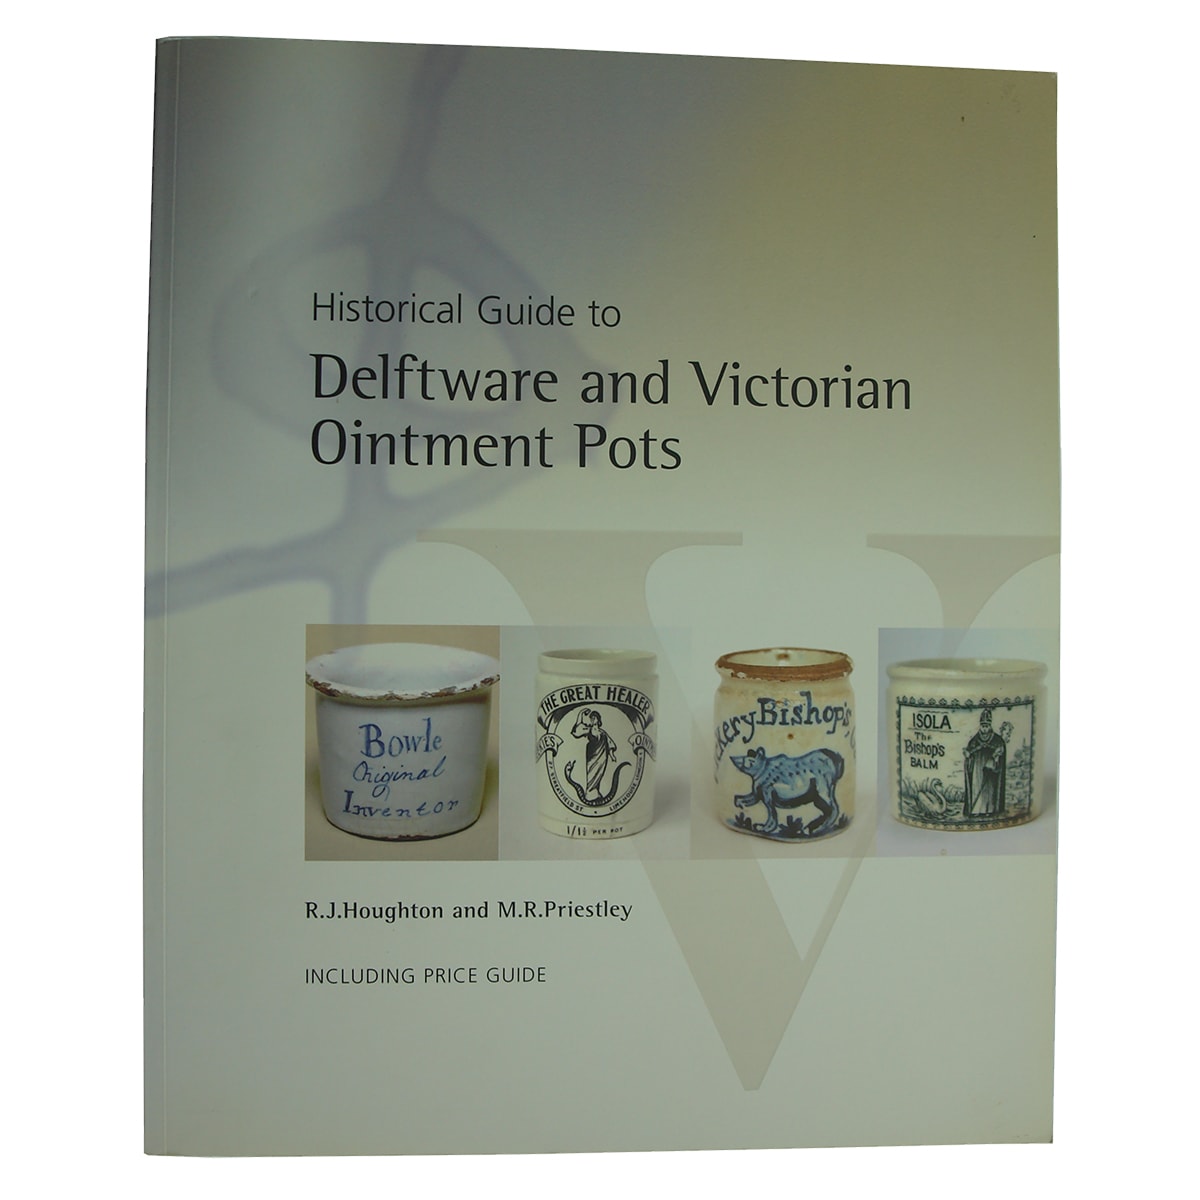 Book. Guide to Delftware and Victorian Ointment Pots.